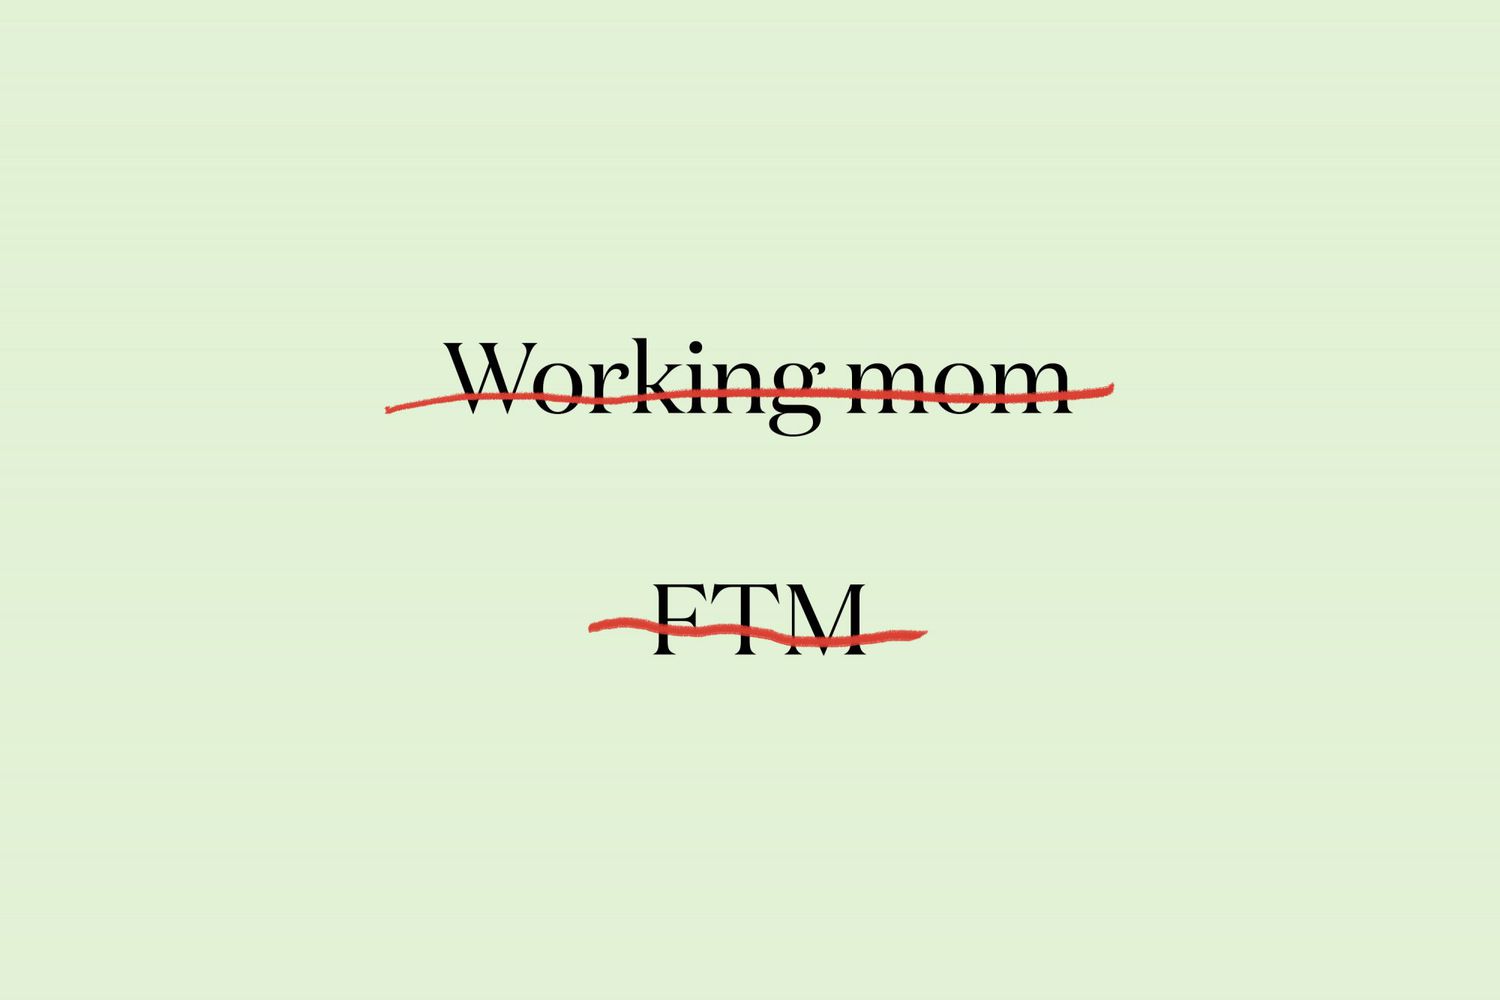 the terms "working mom" and "FTM" are crosed out in red